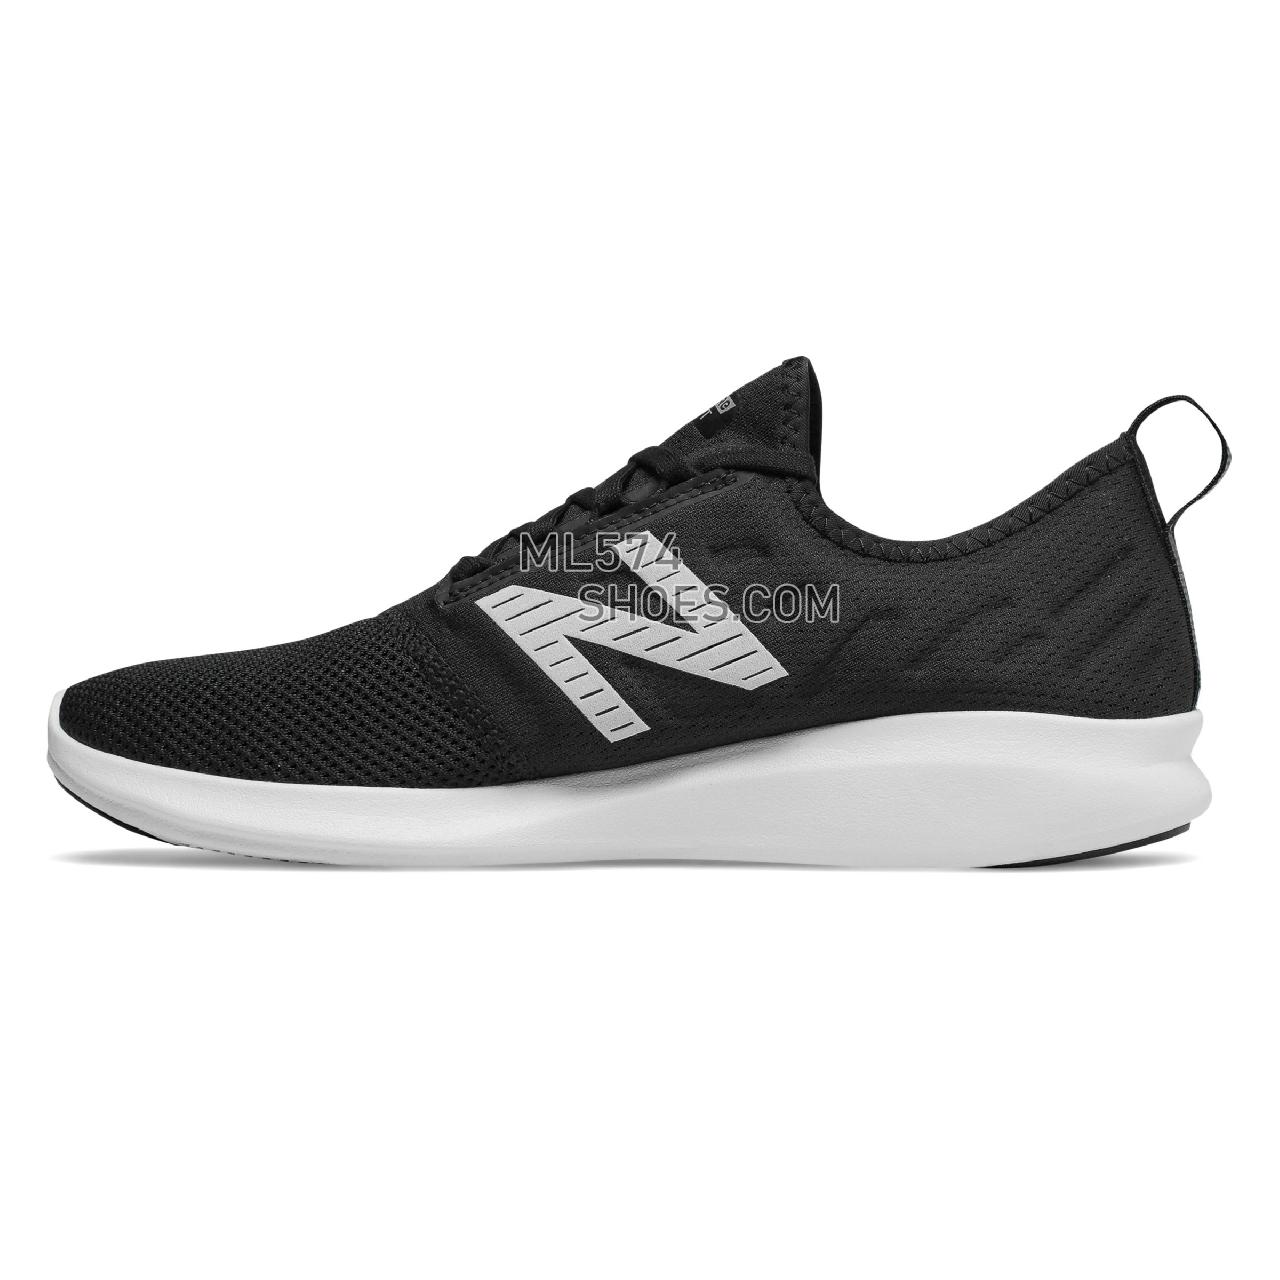 New Balance FuelCore Coast v4 - Men's 4 - Running Black with White - MCSTLLB4